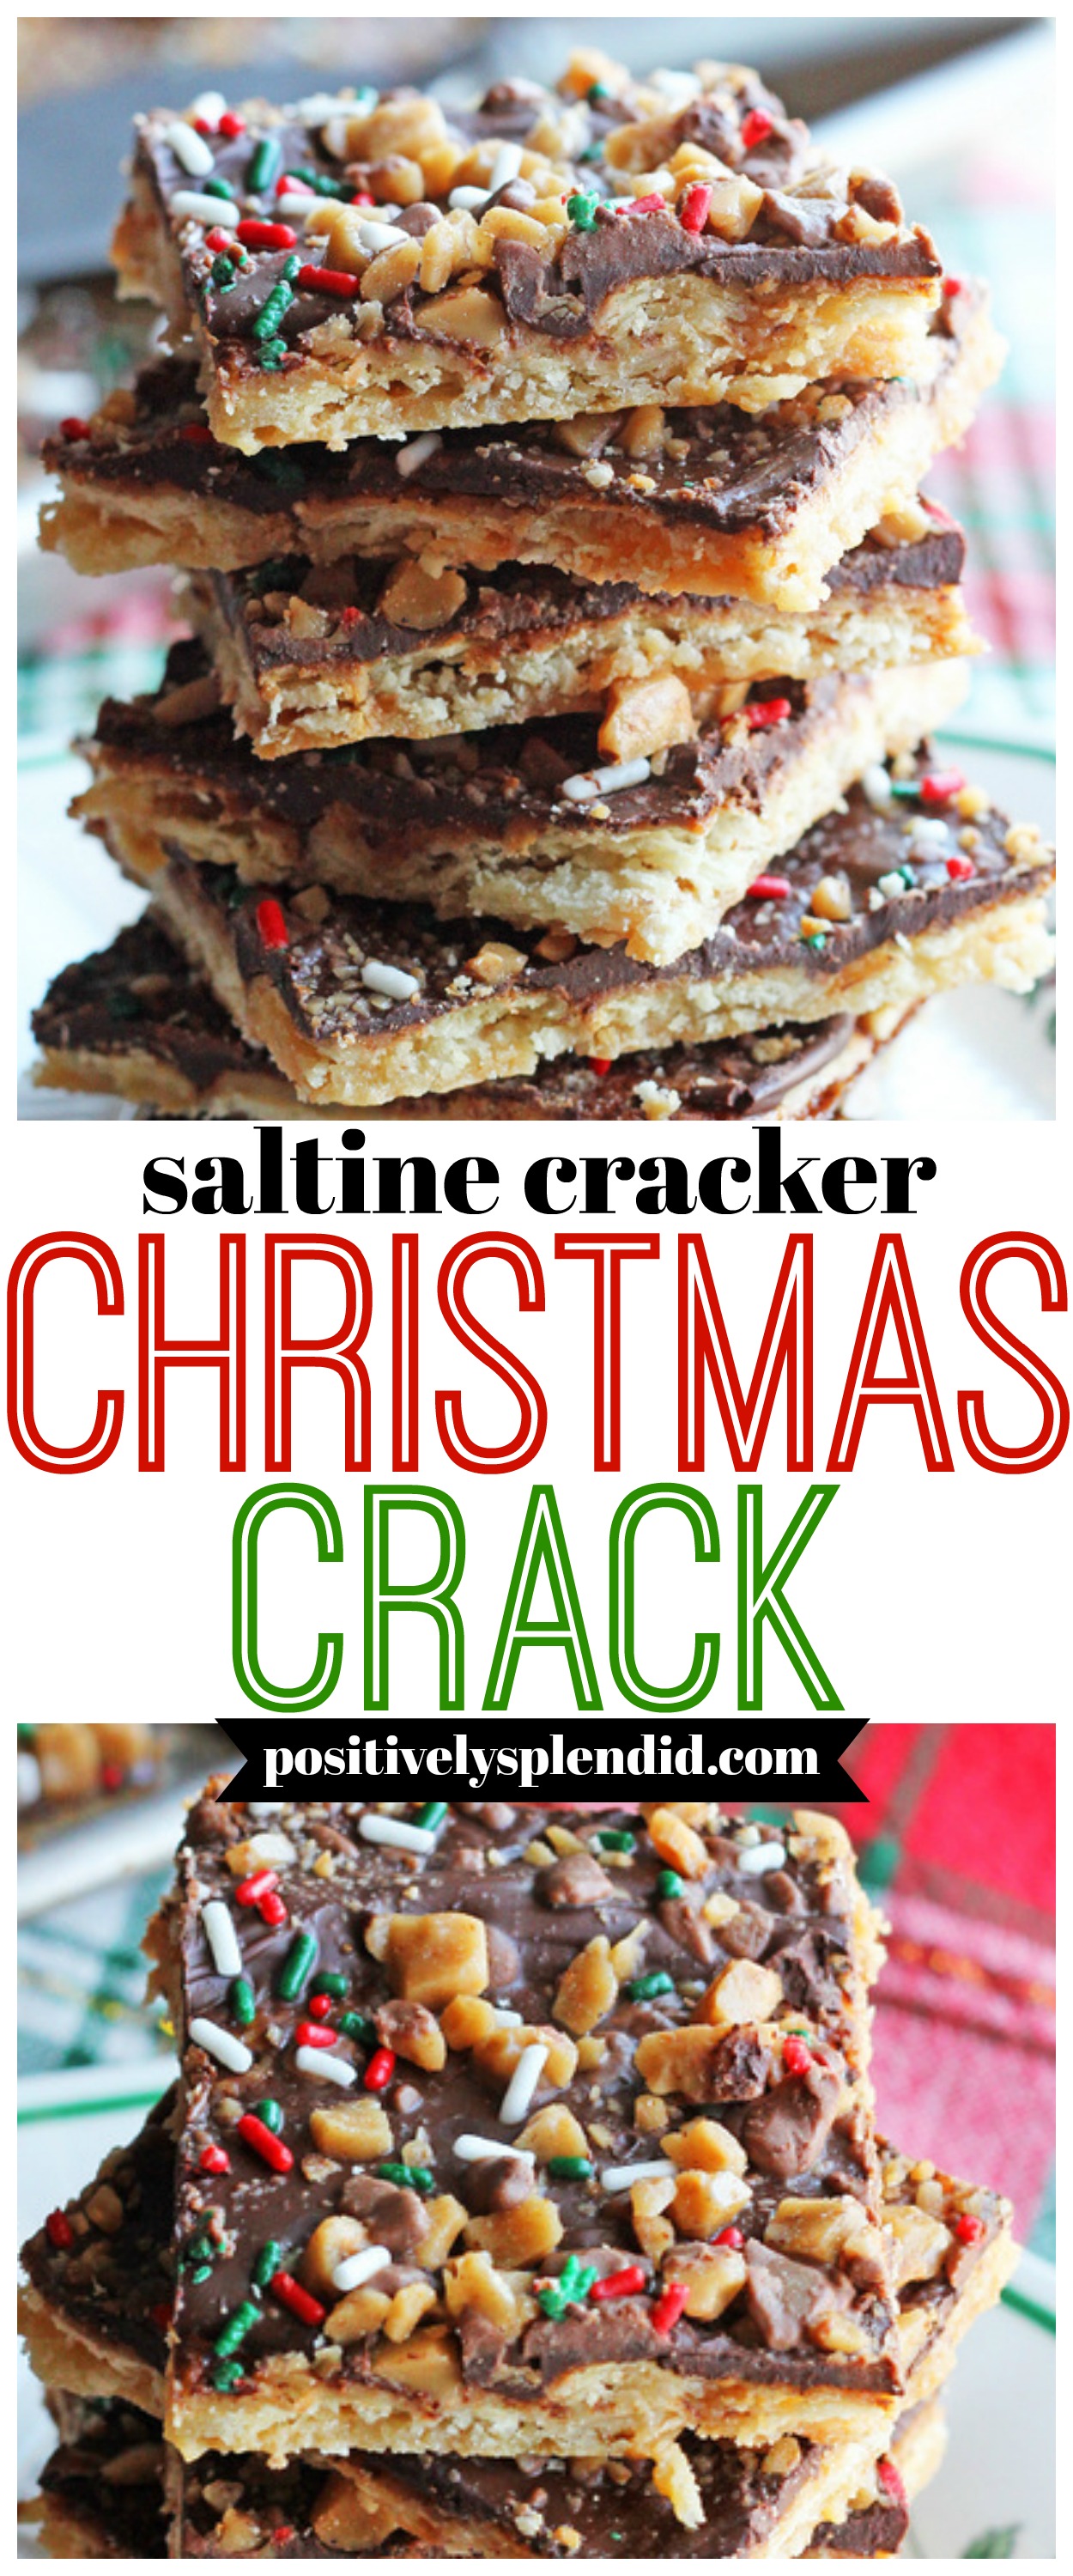 Christmas Crack with Saltine Crackers